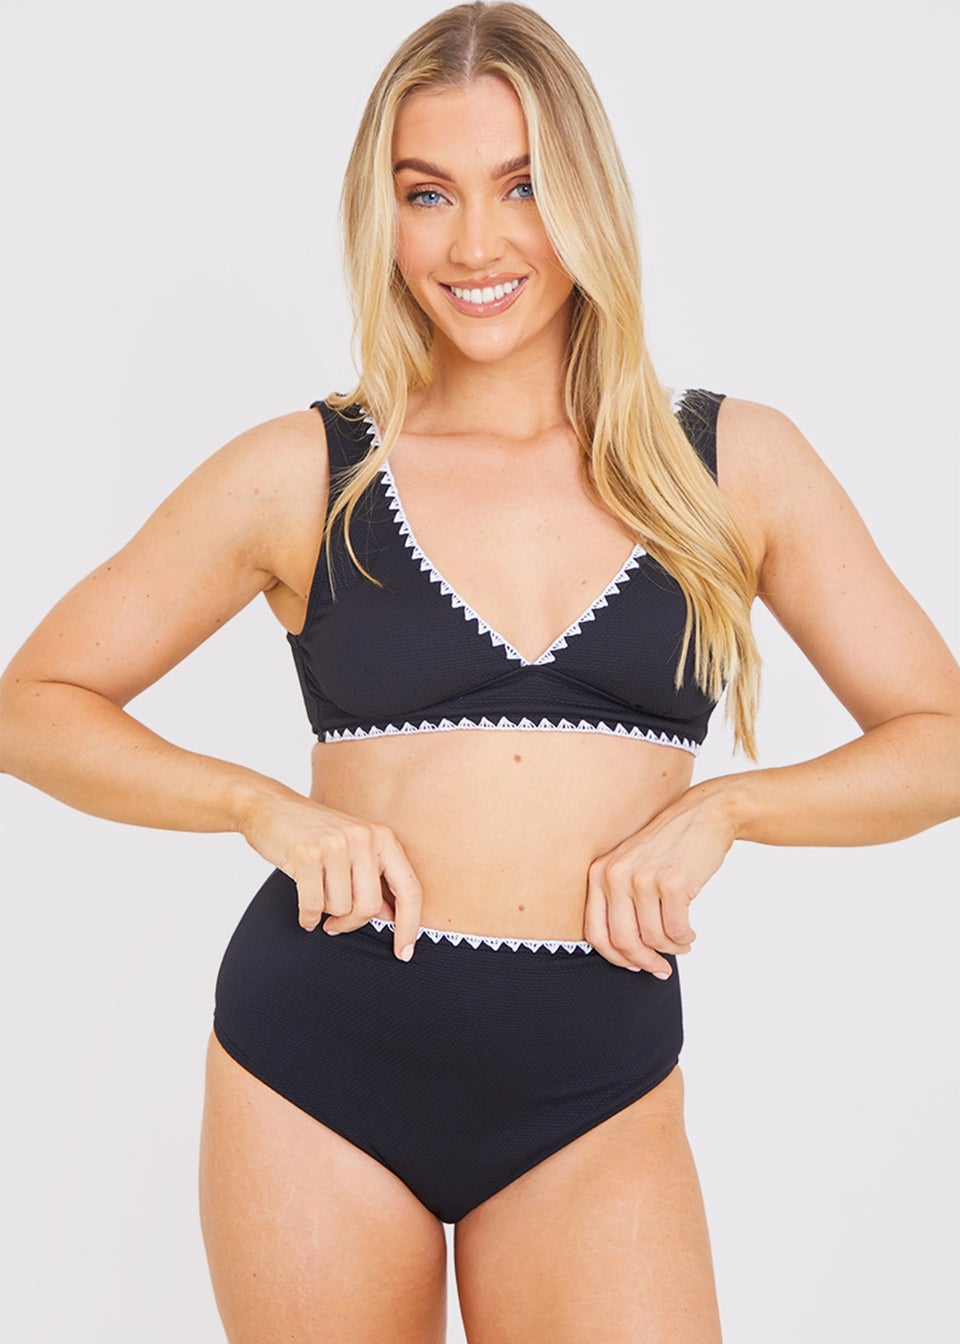 In the Style Jac Jossa Black Trim High Waisted Bkini Bottoms